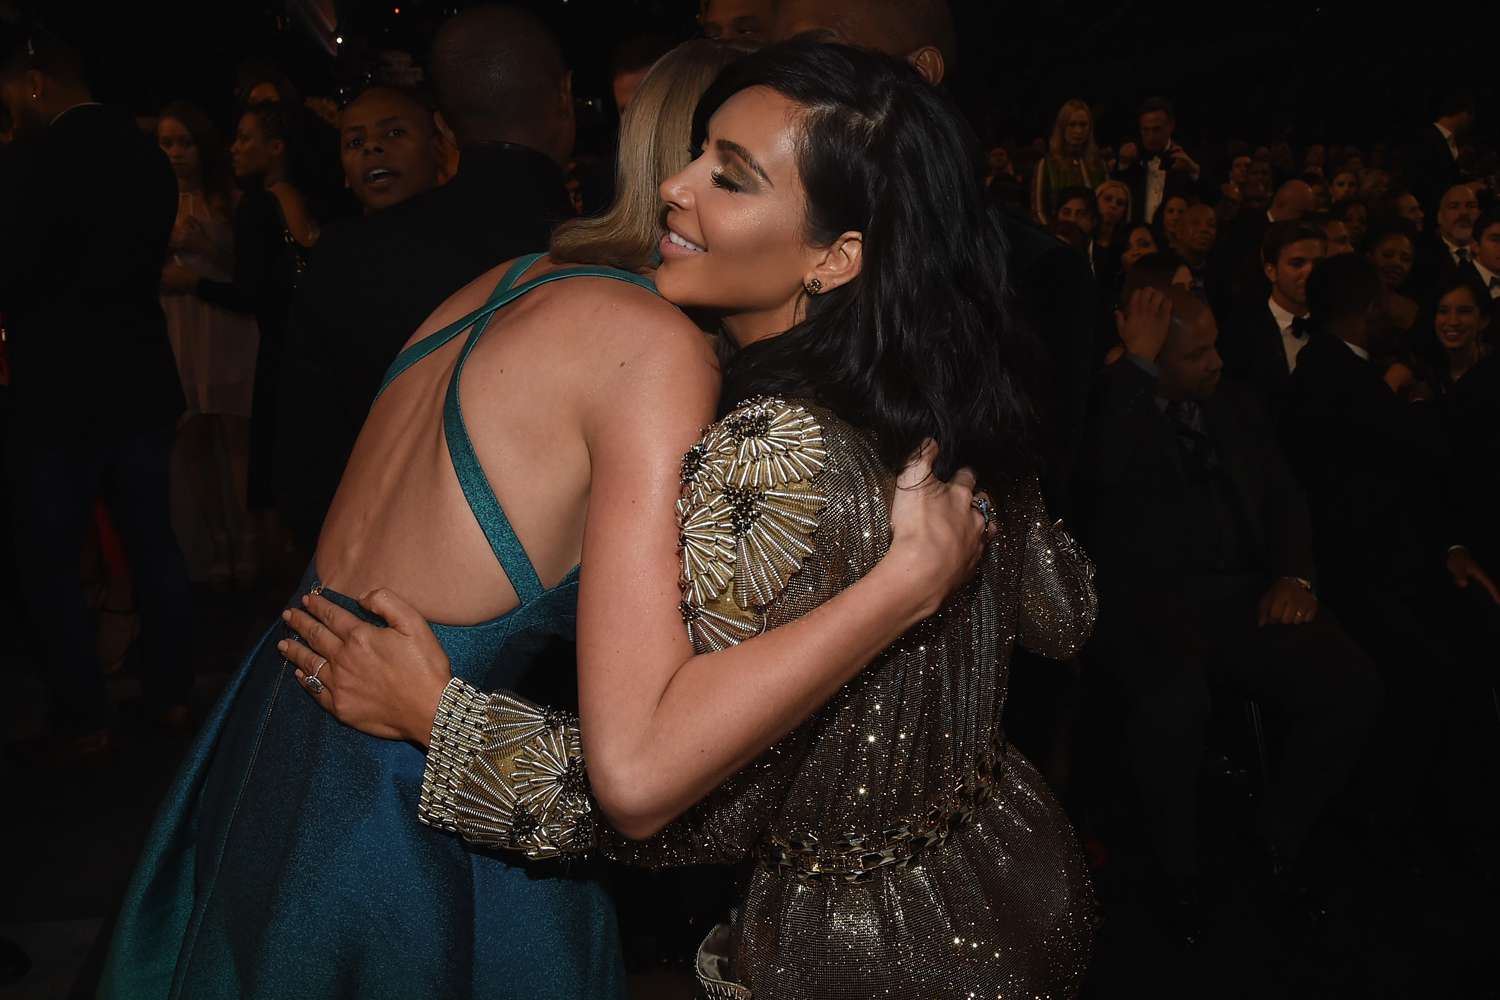 Recording Artist Taylor Swift and Kim Kardashian attend The 57th Annual GRAMMY Awards at the STAPLES Center on February 8, 2015 in Los Angeles, California